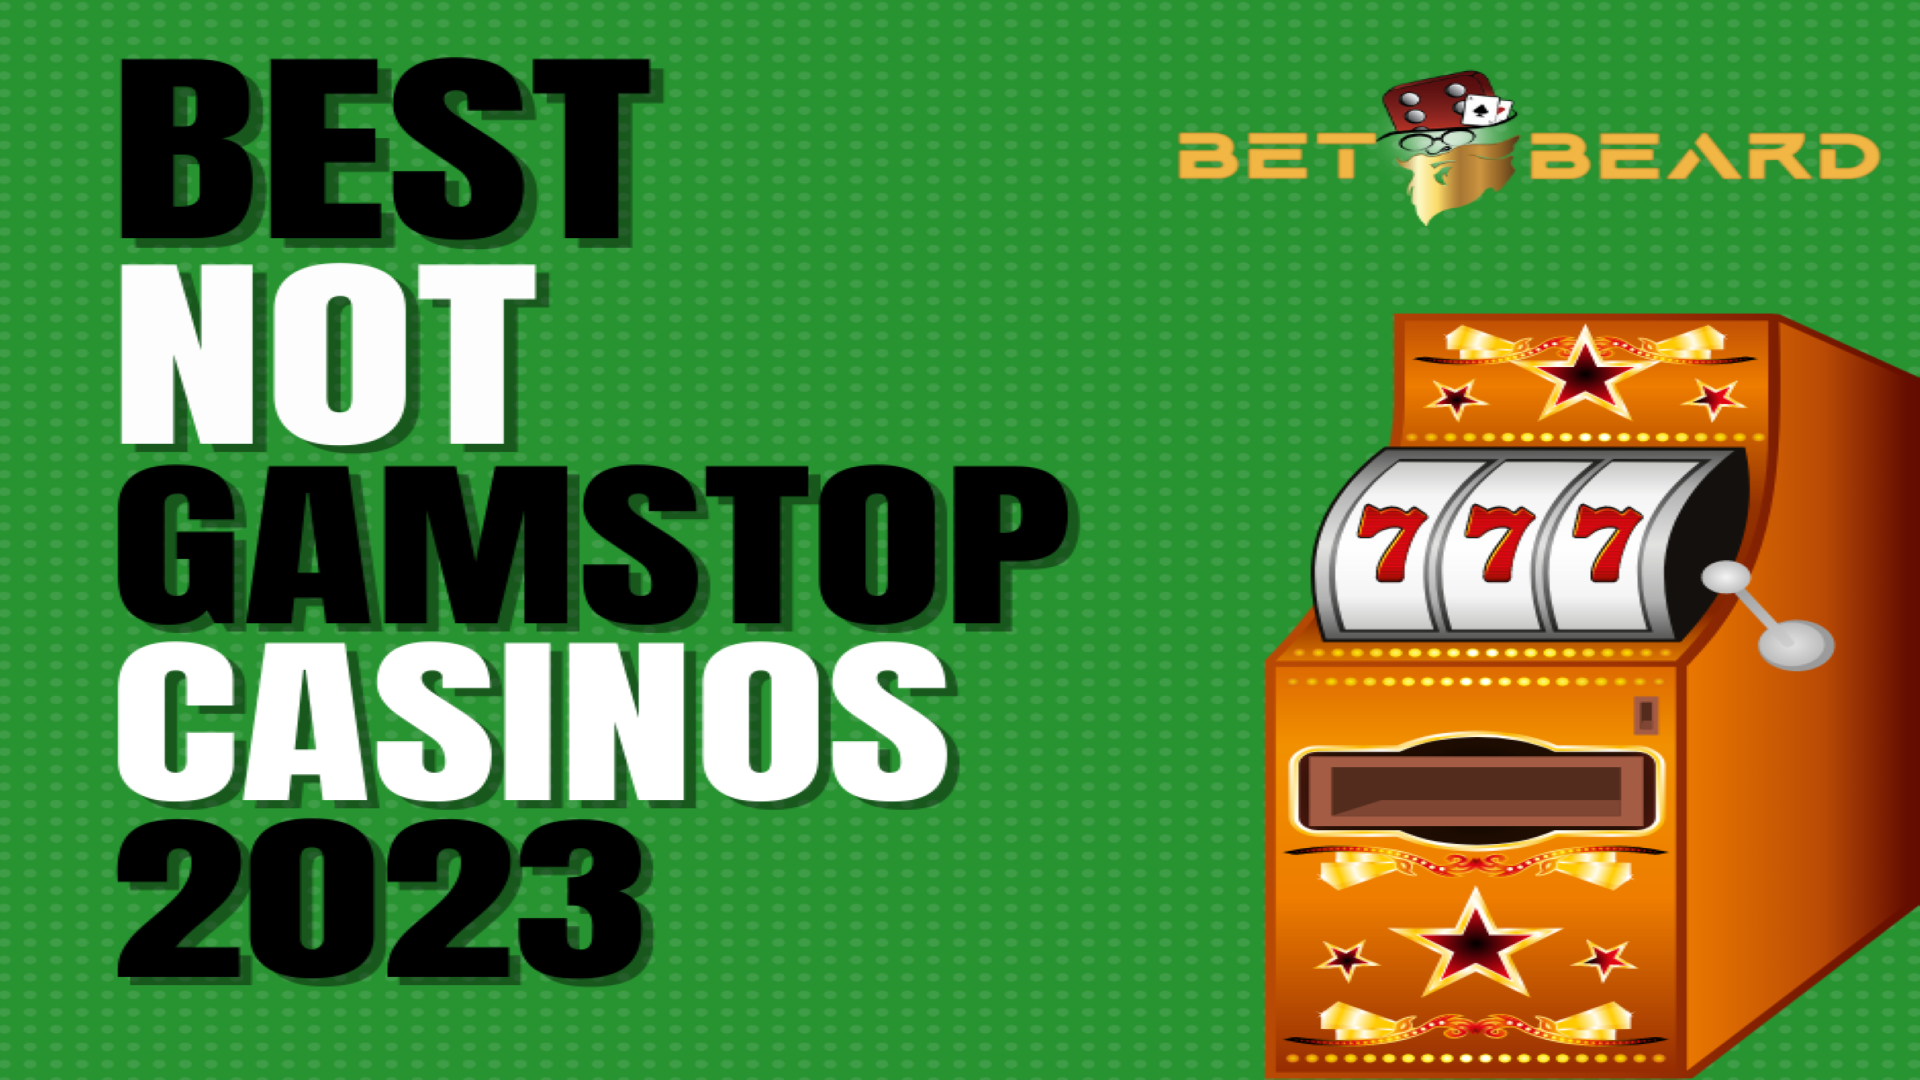 If casino no gamstop Is So Terrible, Why Don't Statistics Show It?